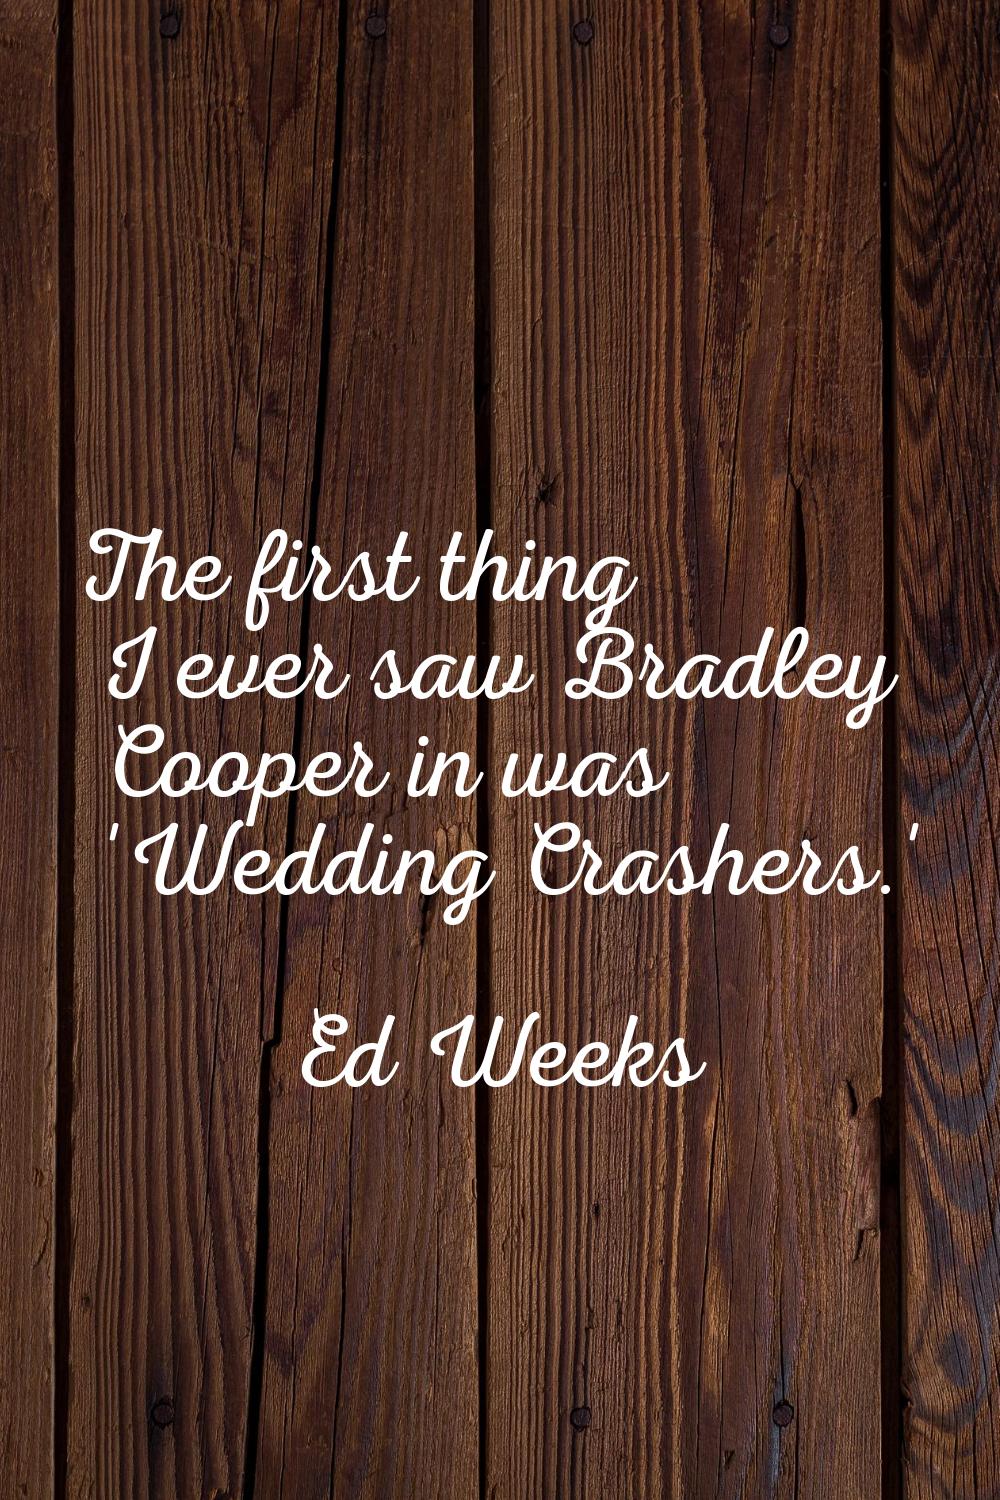 The first thing I ever saw Bradley Cooper in was 'Wedding Crashers.'